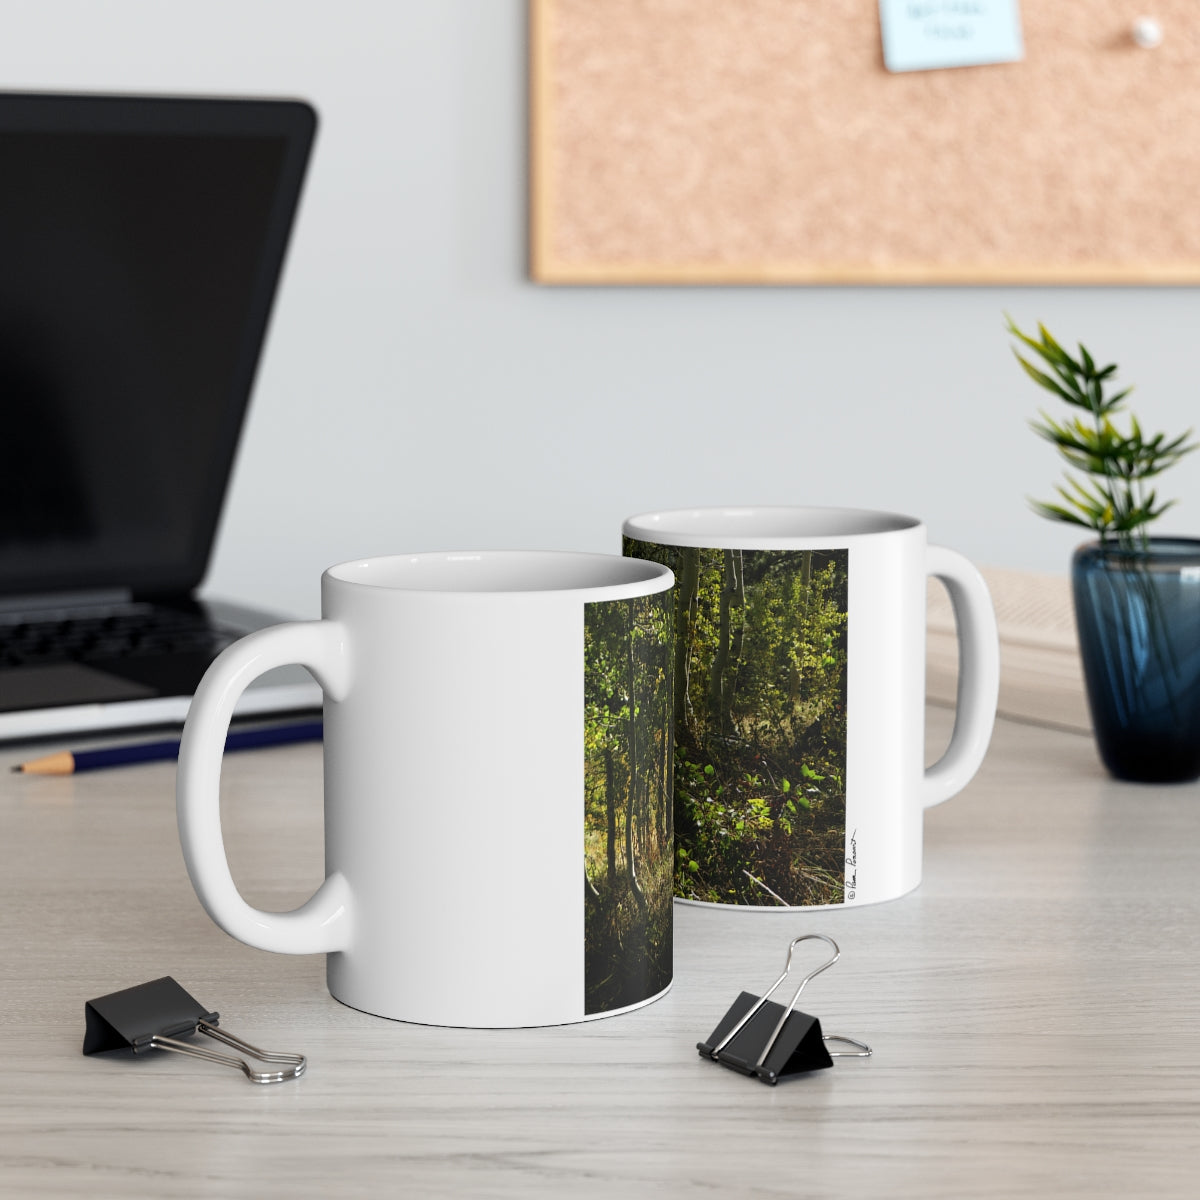 Mock up of 2 mugs on a surface with a computer laptop in the background